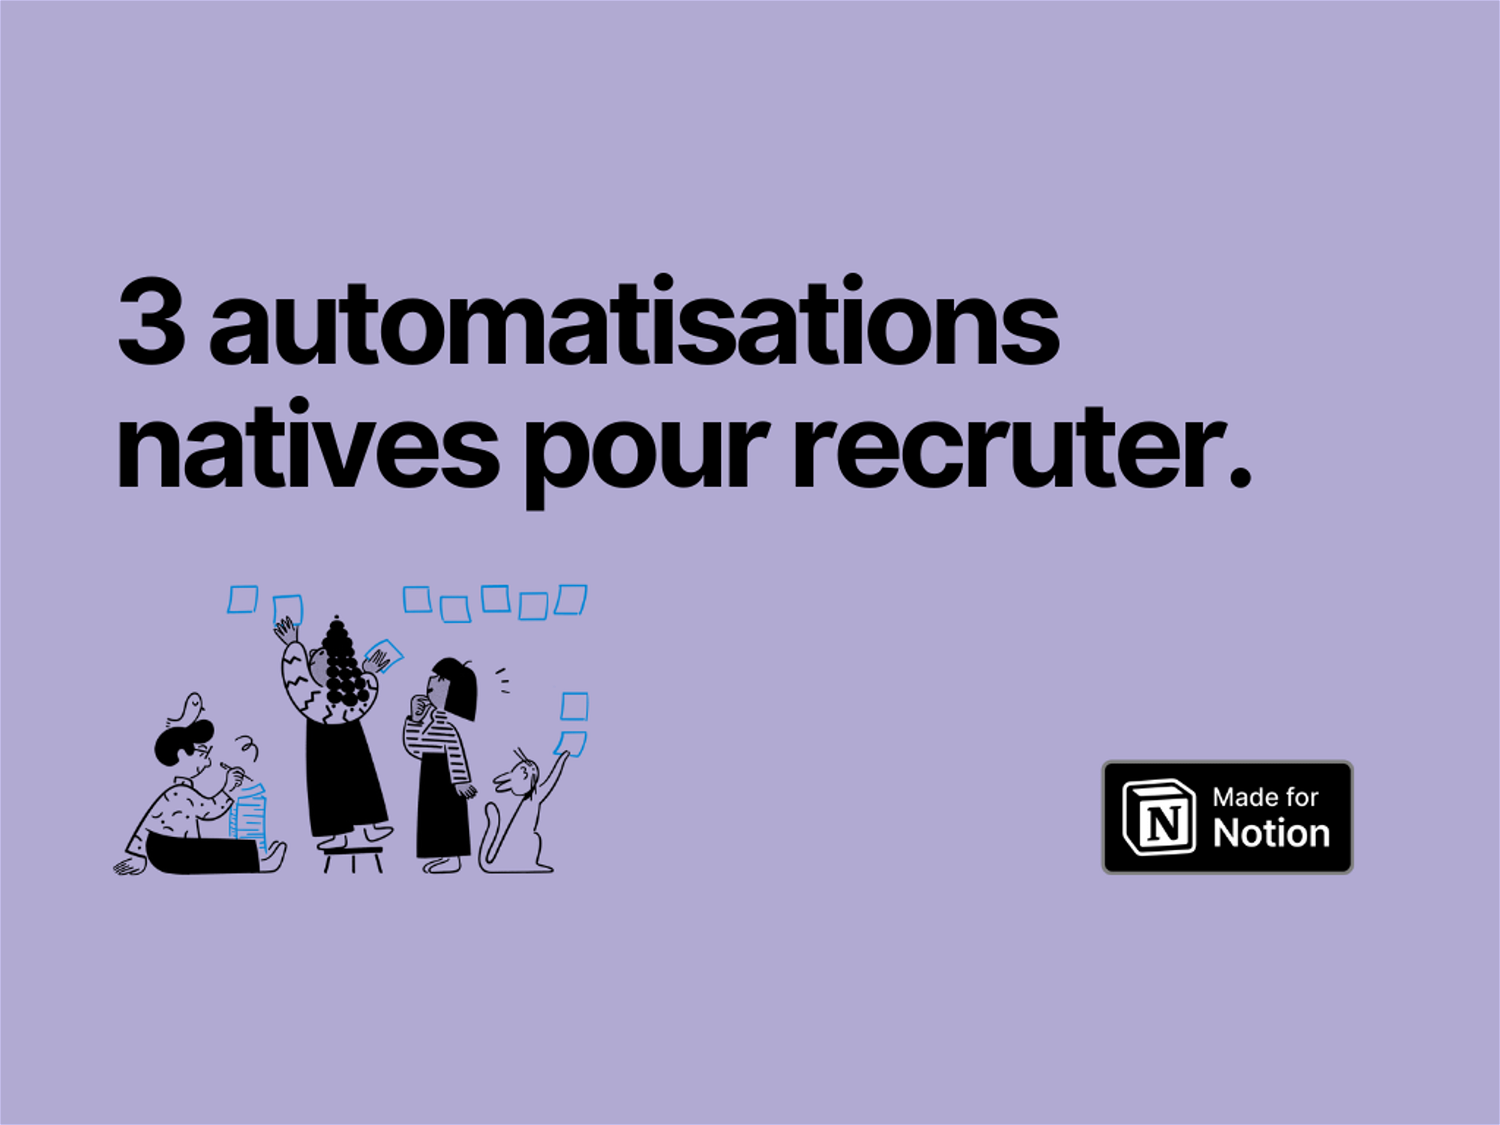 3 automatisations natives pour recruter